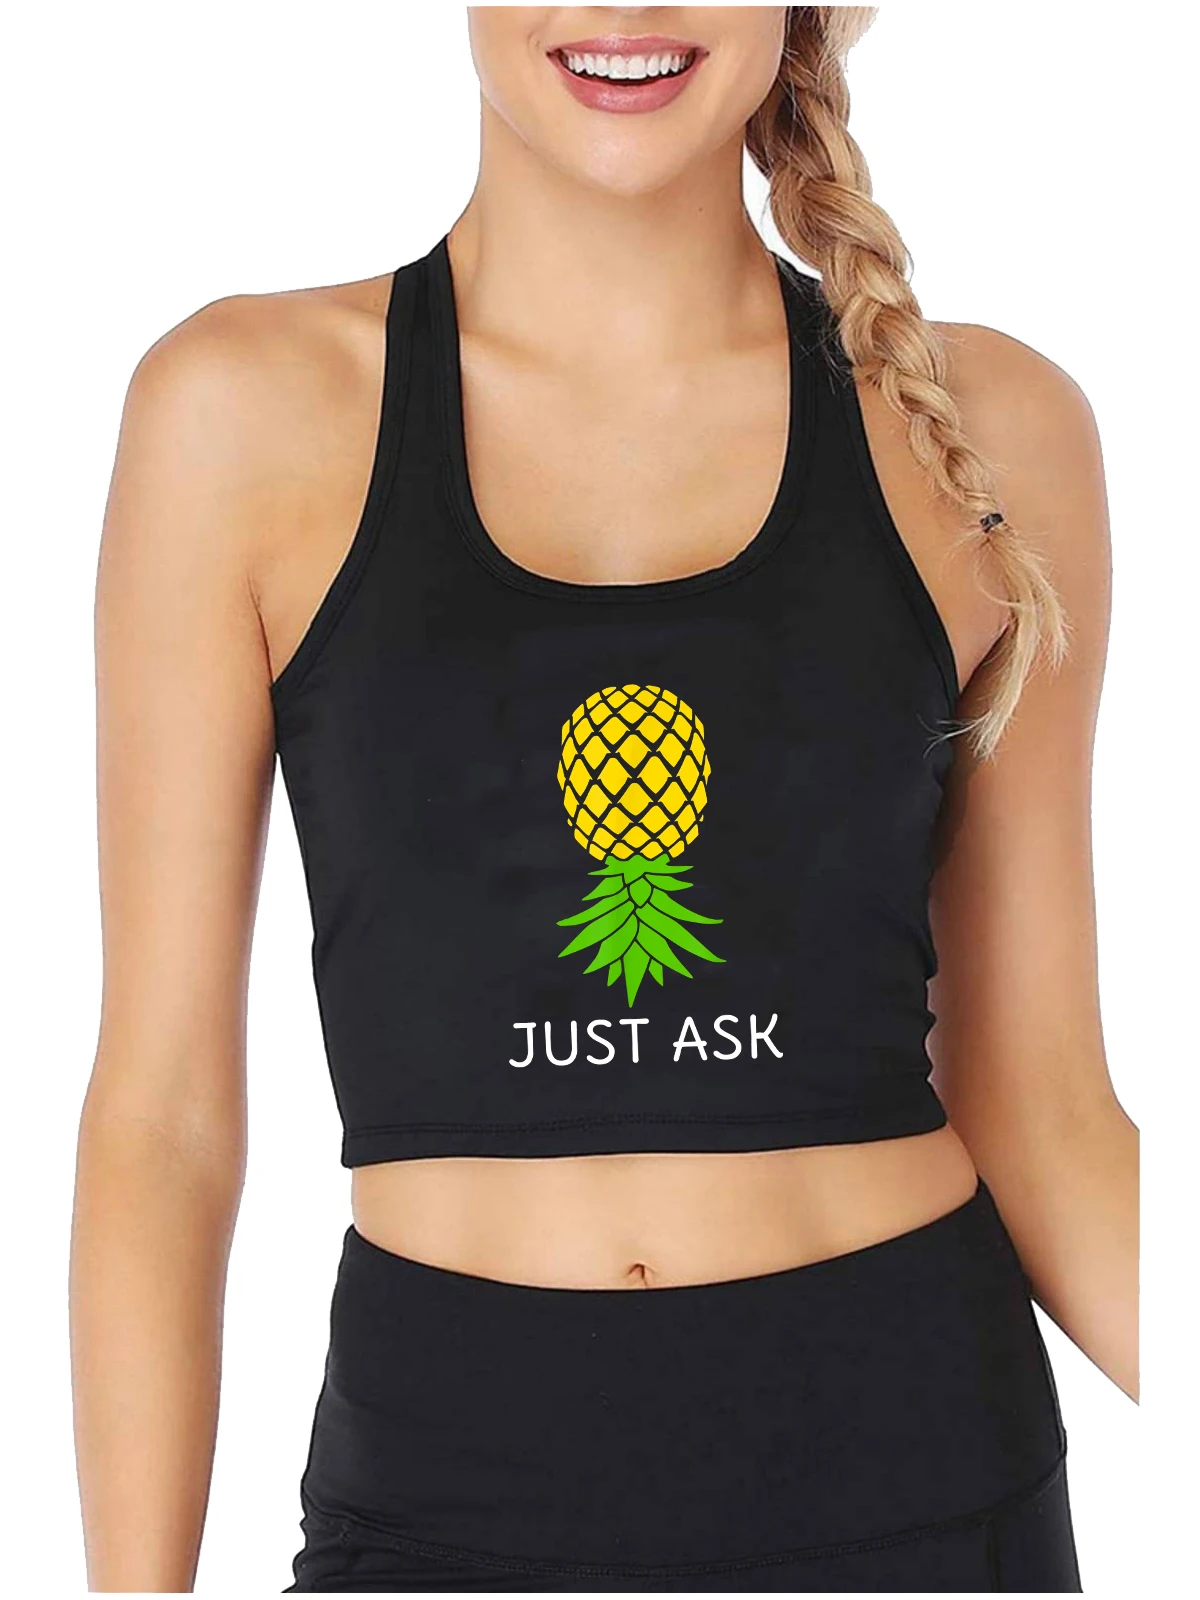 

Upside Down Pineapple Graphics Just Ask Design Crop Top Funny Swinger Flirtation Tank Tops Hotwife Naughty Sexy Slim Camisole